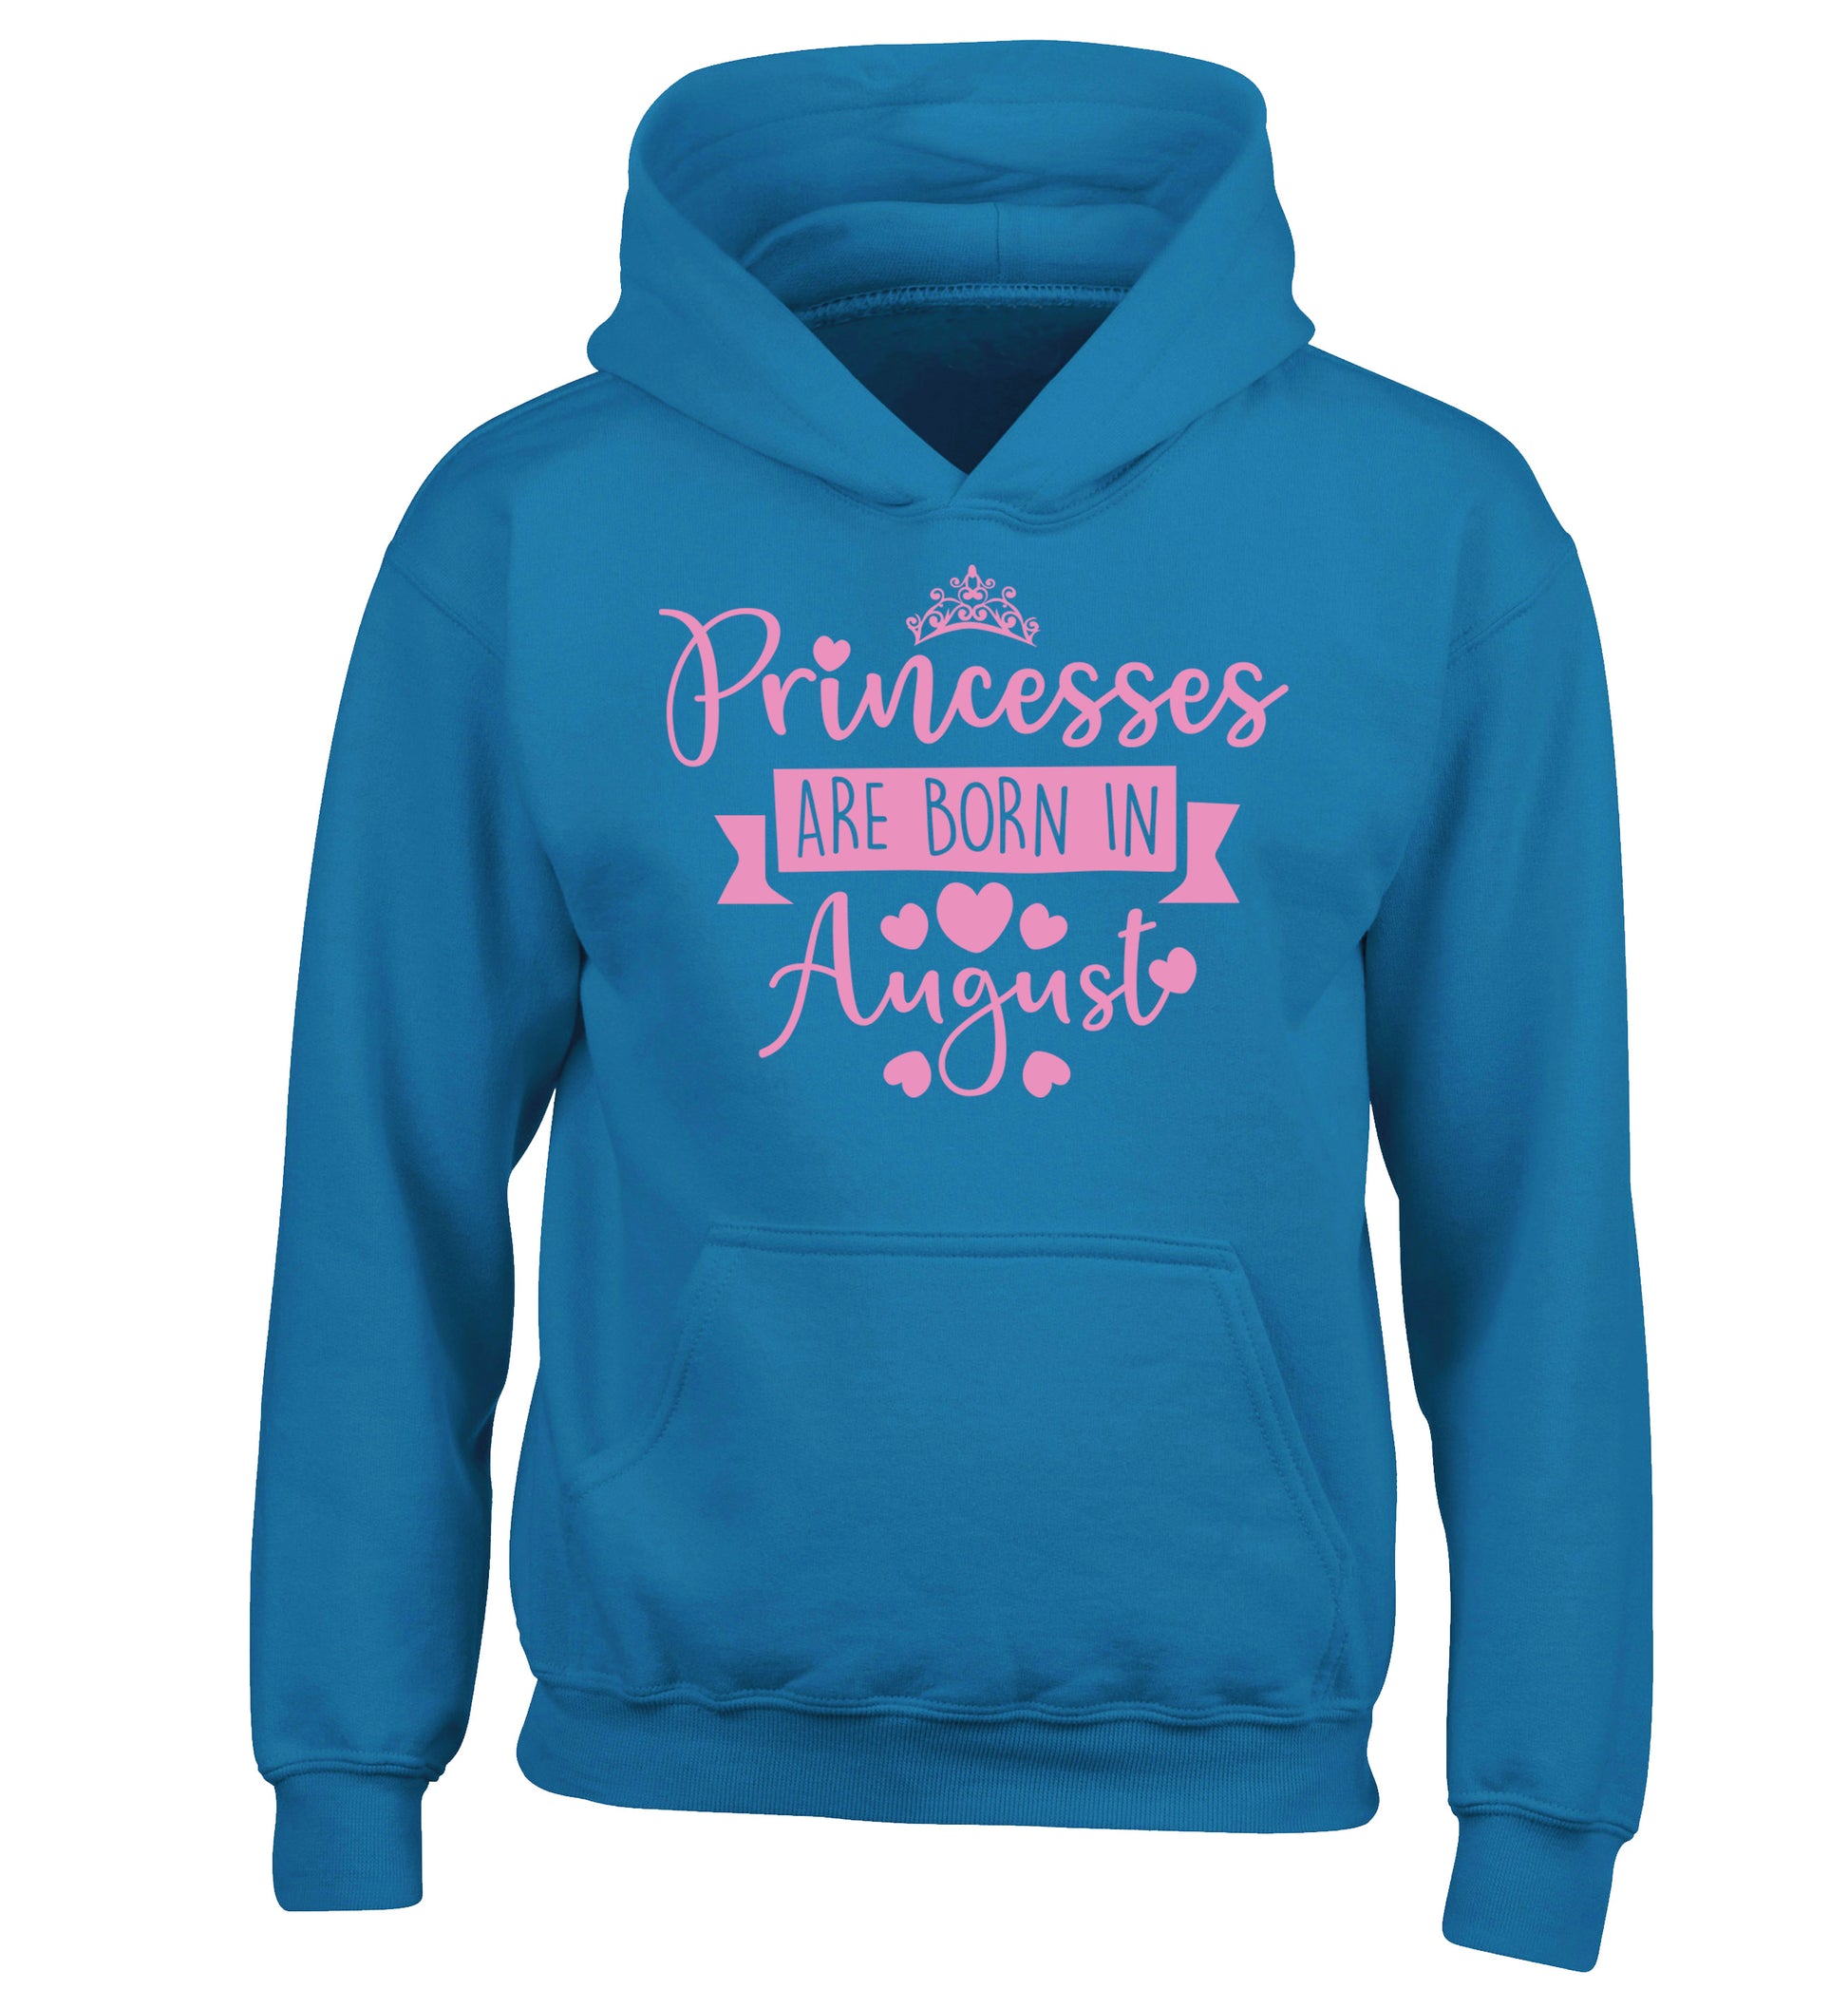 Princesses are born in August children's blue hoodie 12-13 Years